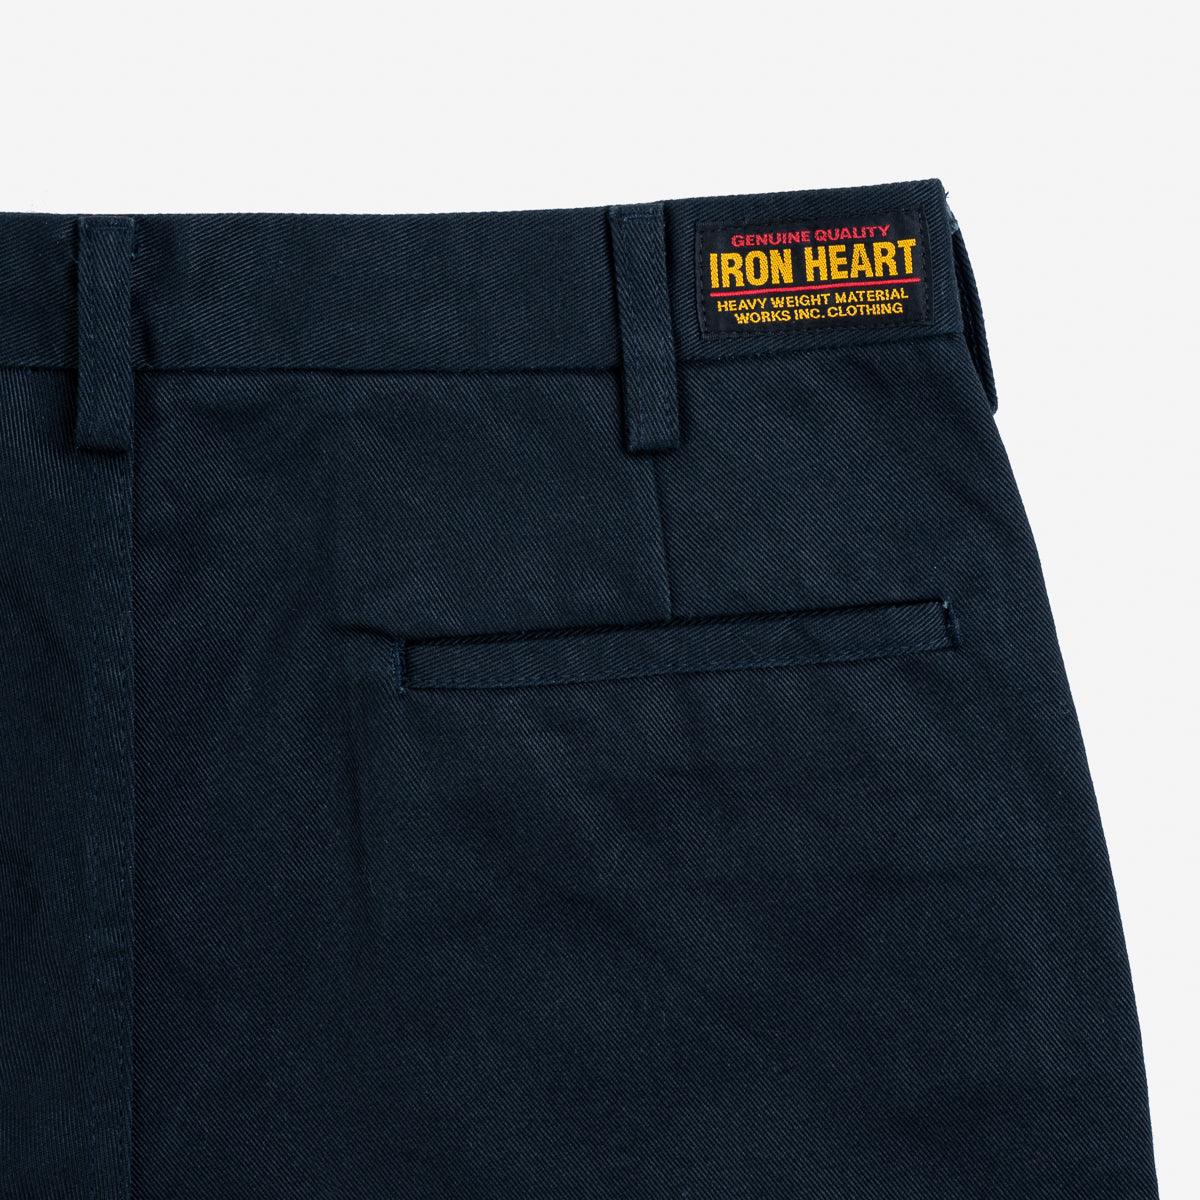 IH-731-NAV - 12oz Heavy Cotton Relaxed Fit Chinos - Navy